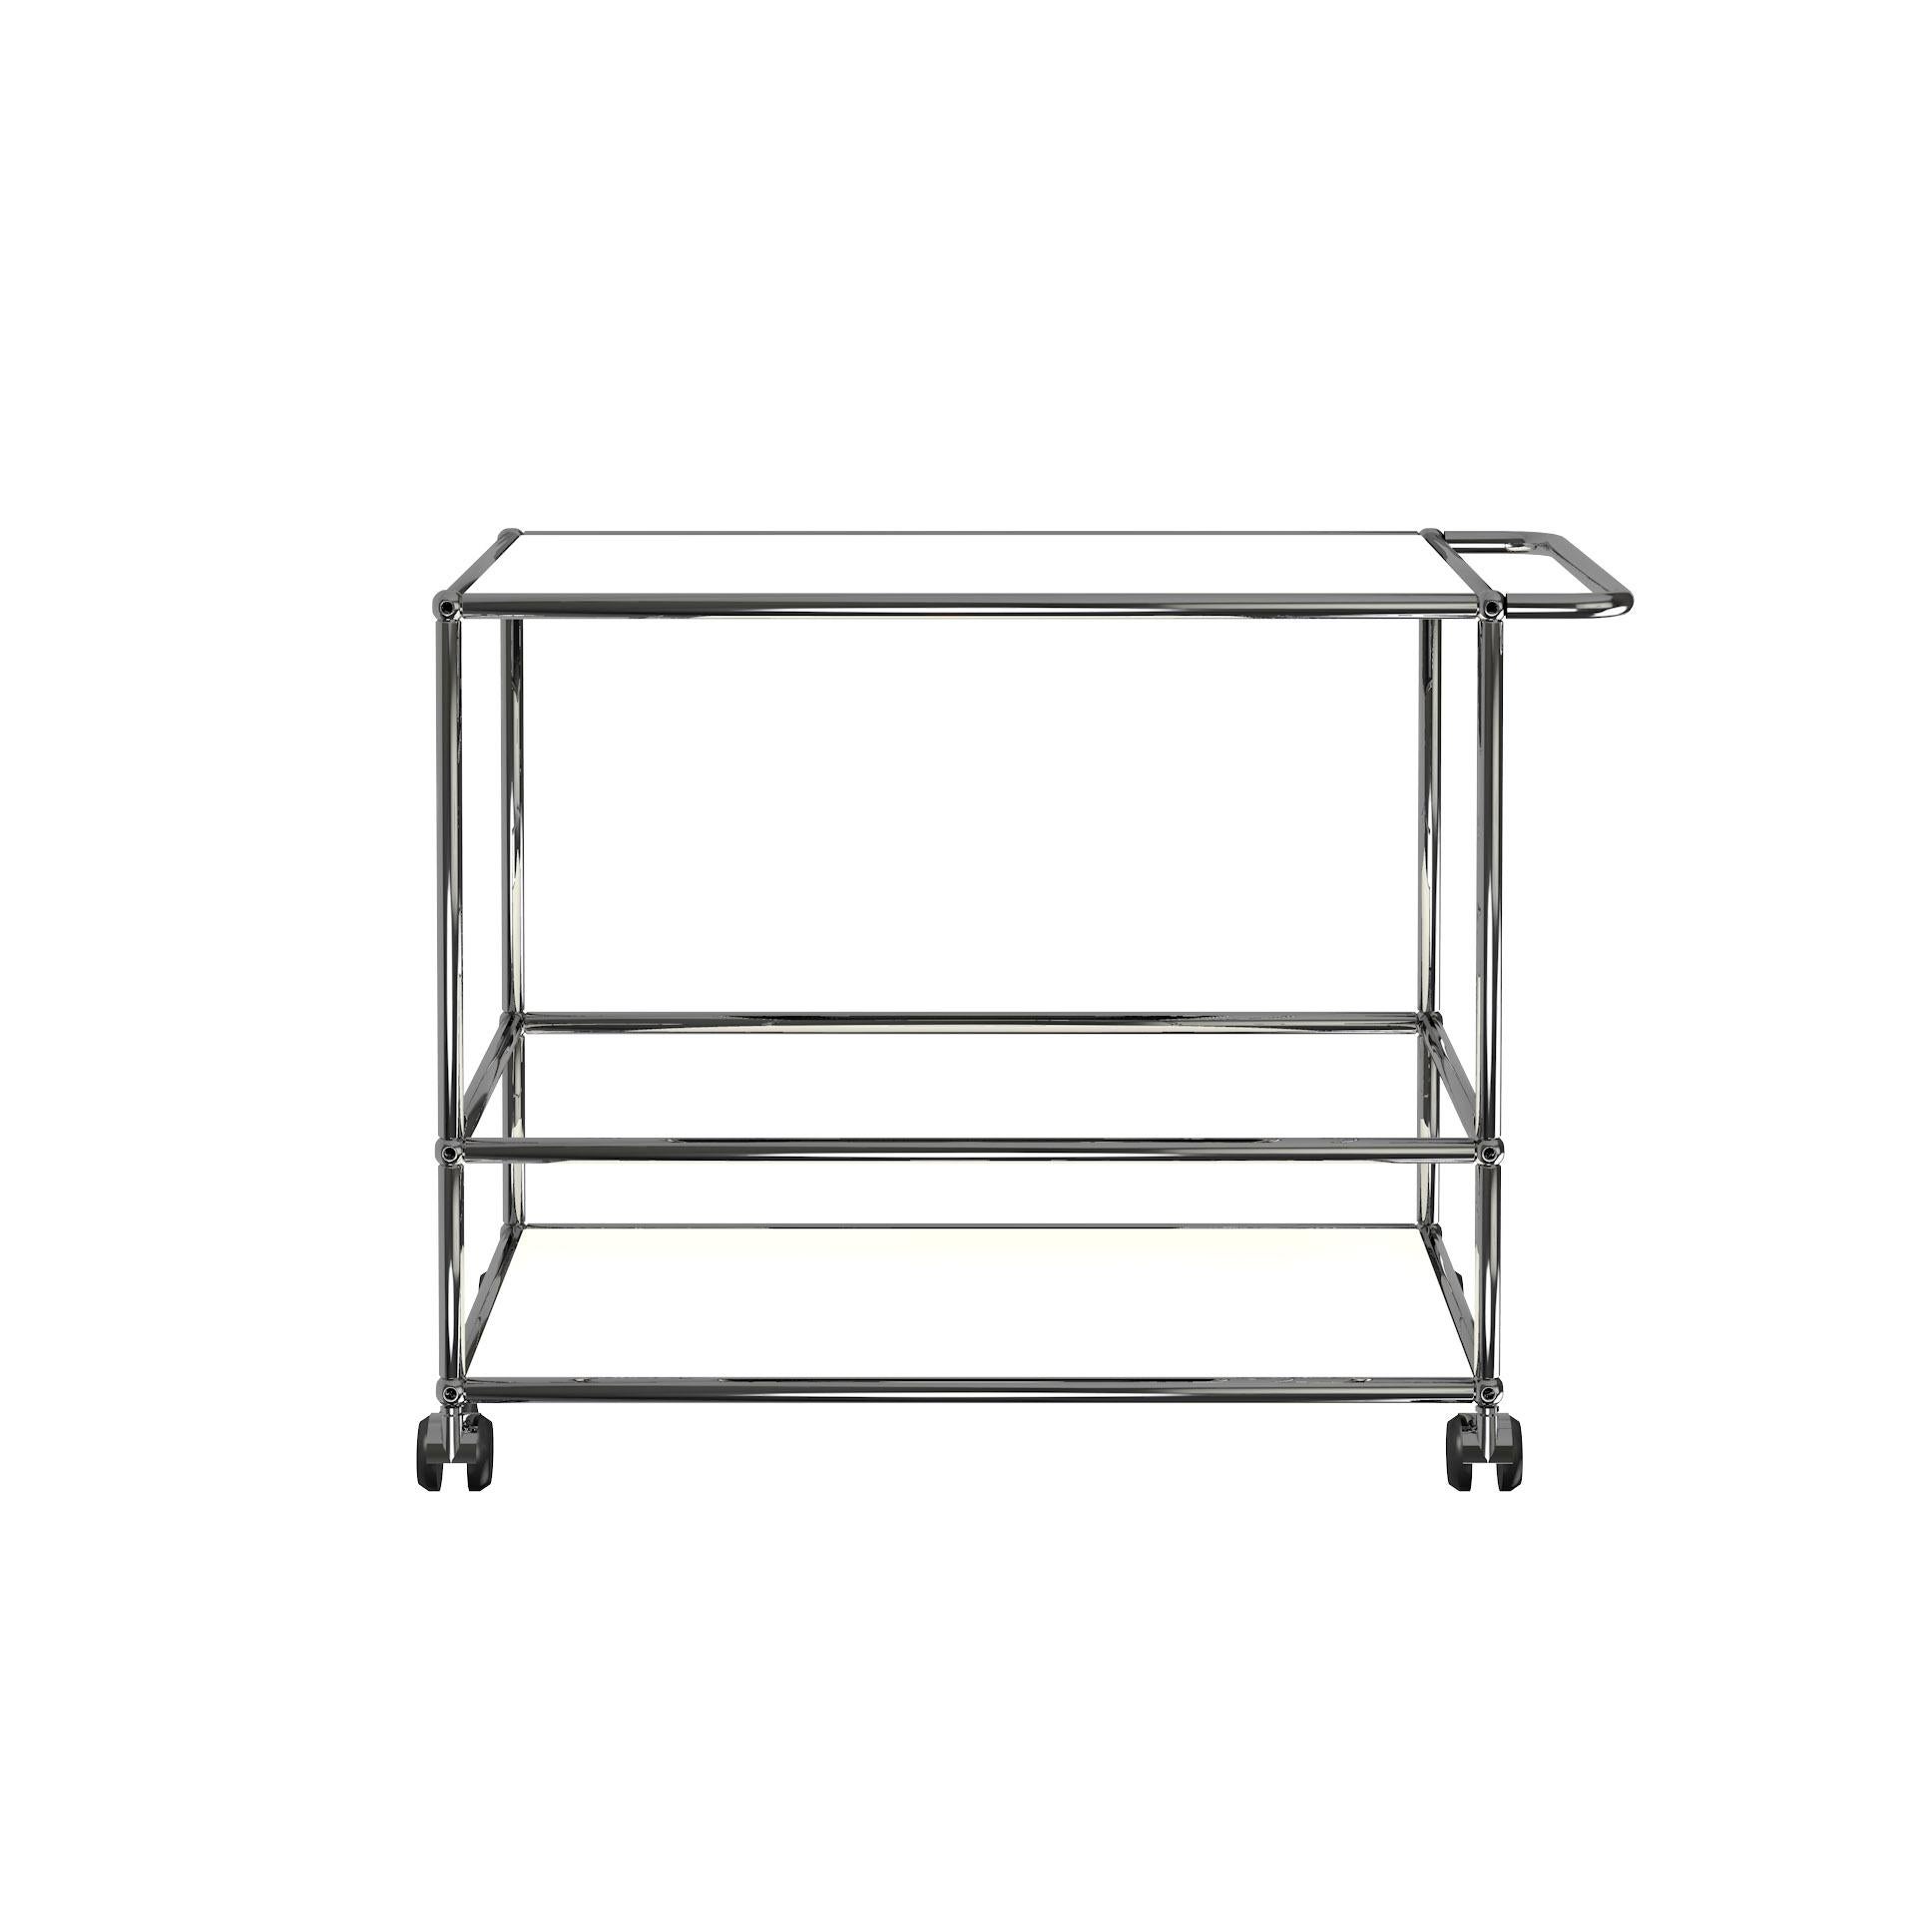 Powder-Coated USM Bar Cart Available in 5 Different Color Options For Sale